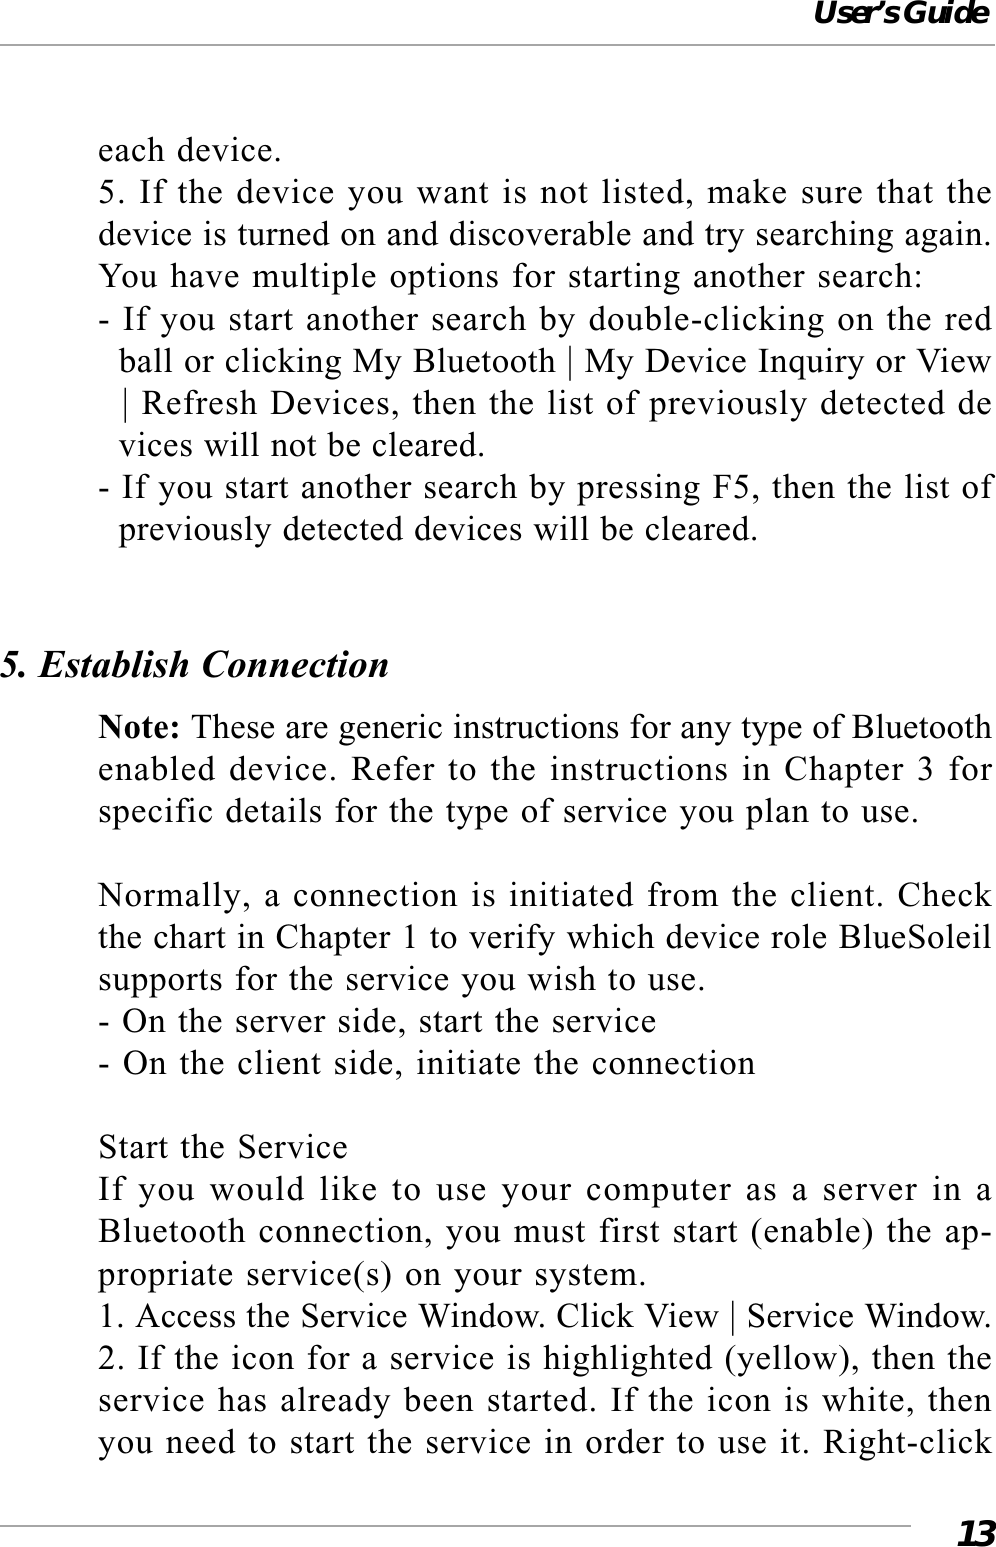 User’s Guide13each device.5. If the device you want is not listed, make sure that thedevice is turned on and discoverable and try searching again.You have multiple options for starting another search:- If you start another search by double-clicking on the red  ball or clicking My Bluetooth | My Device Inquiry or View  | Refresh Devices, then the list of previously detected de  vices will not be cleared.- If you start another search by pressing F5, then the list of  previously detected devices will be cleared.5. Establish ConnectionNote: These are generic instructions for any type of Bluetoothenabled device. Refer to the instructions in Chapter 3 forspecific details for the type of service you plan to use.Normally, a connection is initiated from the client. Checkthe chart in Chapter 1 to verify which device role BlueSoleilsupports for the service you wish to use.- On the server side, start the service- On the client side, initiate the connectionStart the ServiceIf you would like to use your computer as a server in aBluetooth connection, you must first start (enable) the ap-propriate service(s) on your system.1. Access the Service Window. Click View | Service Window.2. If the icon for a service is highlighted (yellow), then theservice has already been started. If the icon is white, thenyou need to start the service in order to use it. Right-click